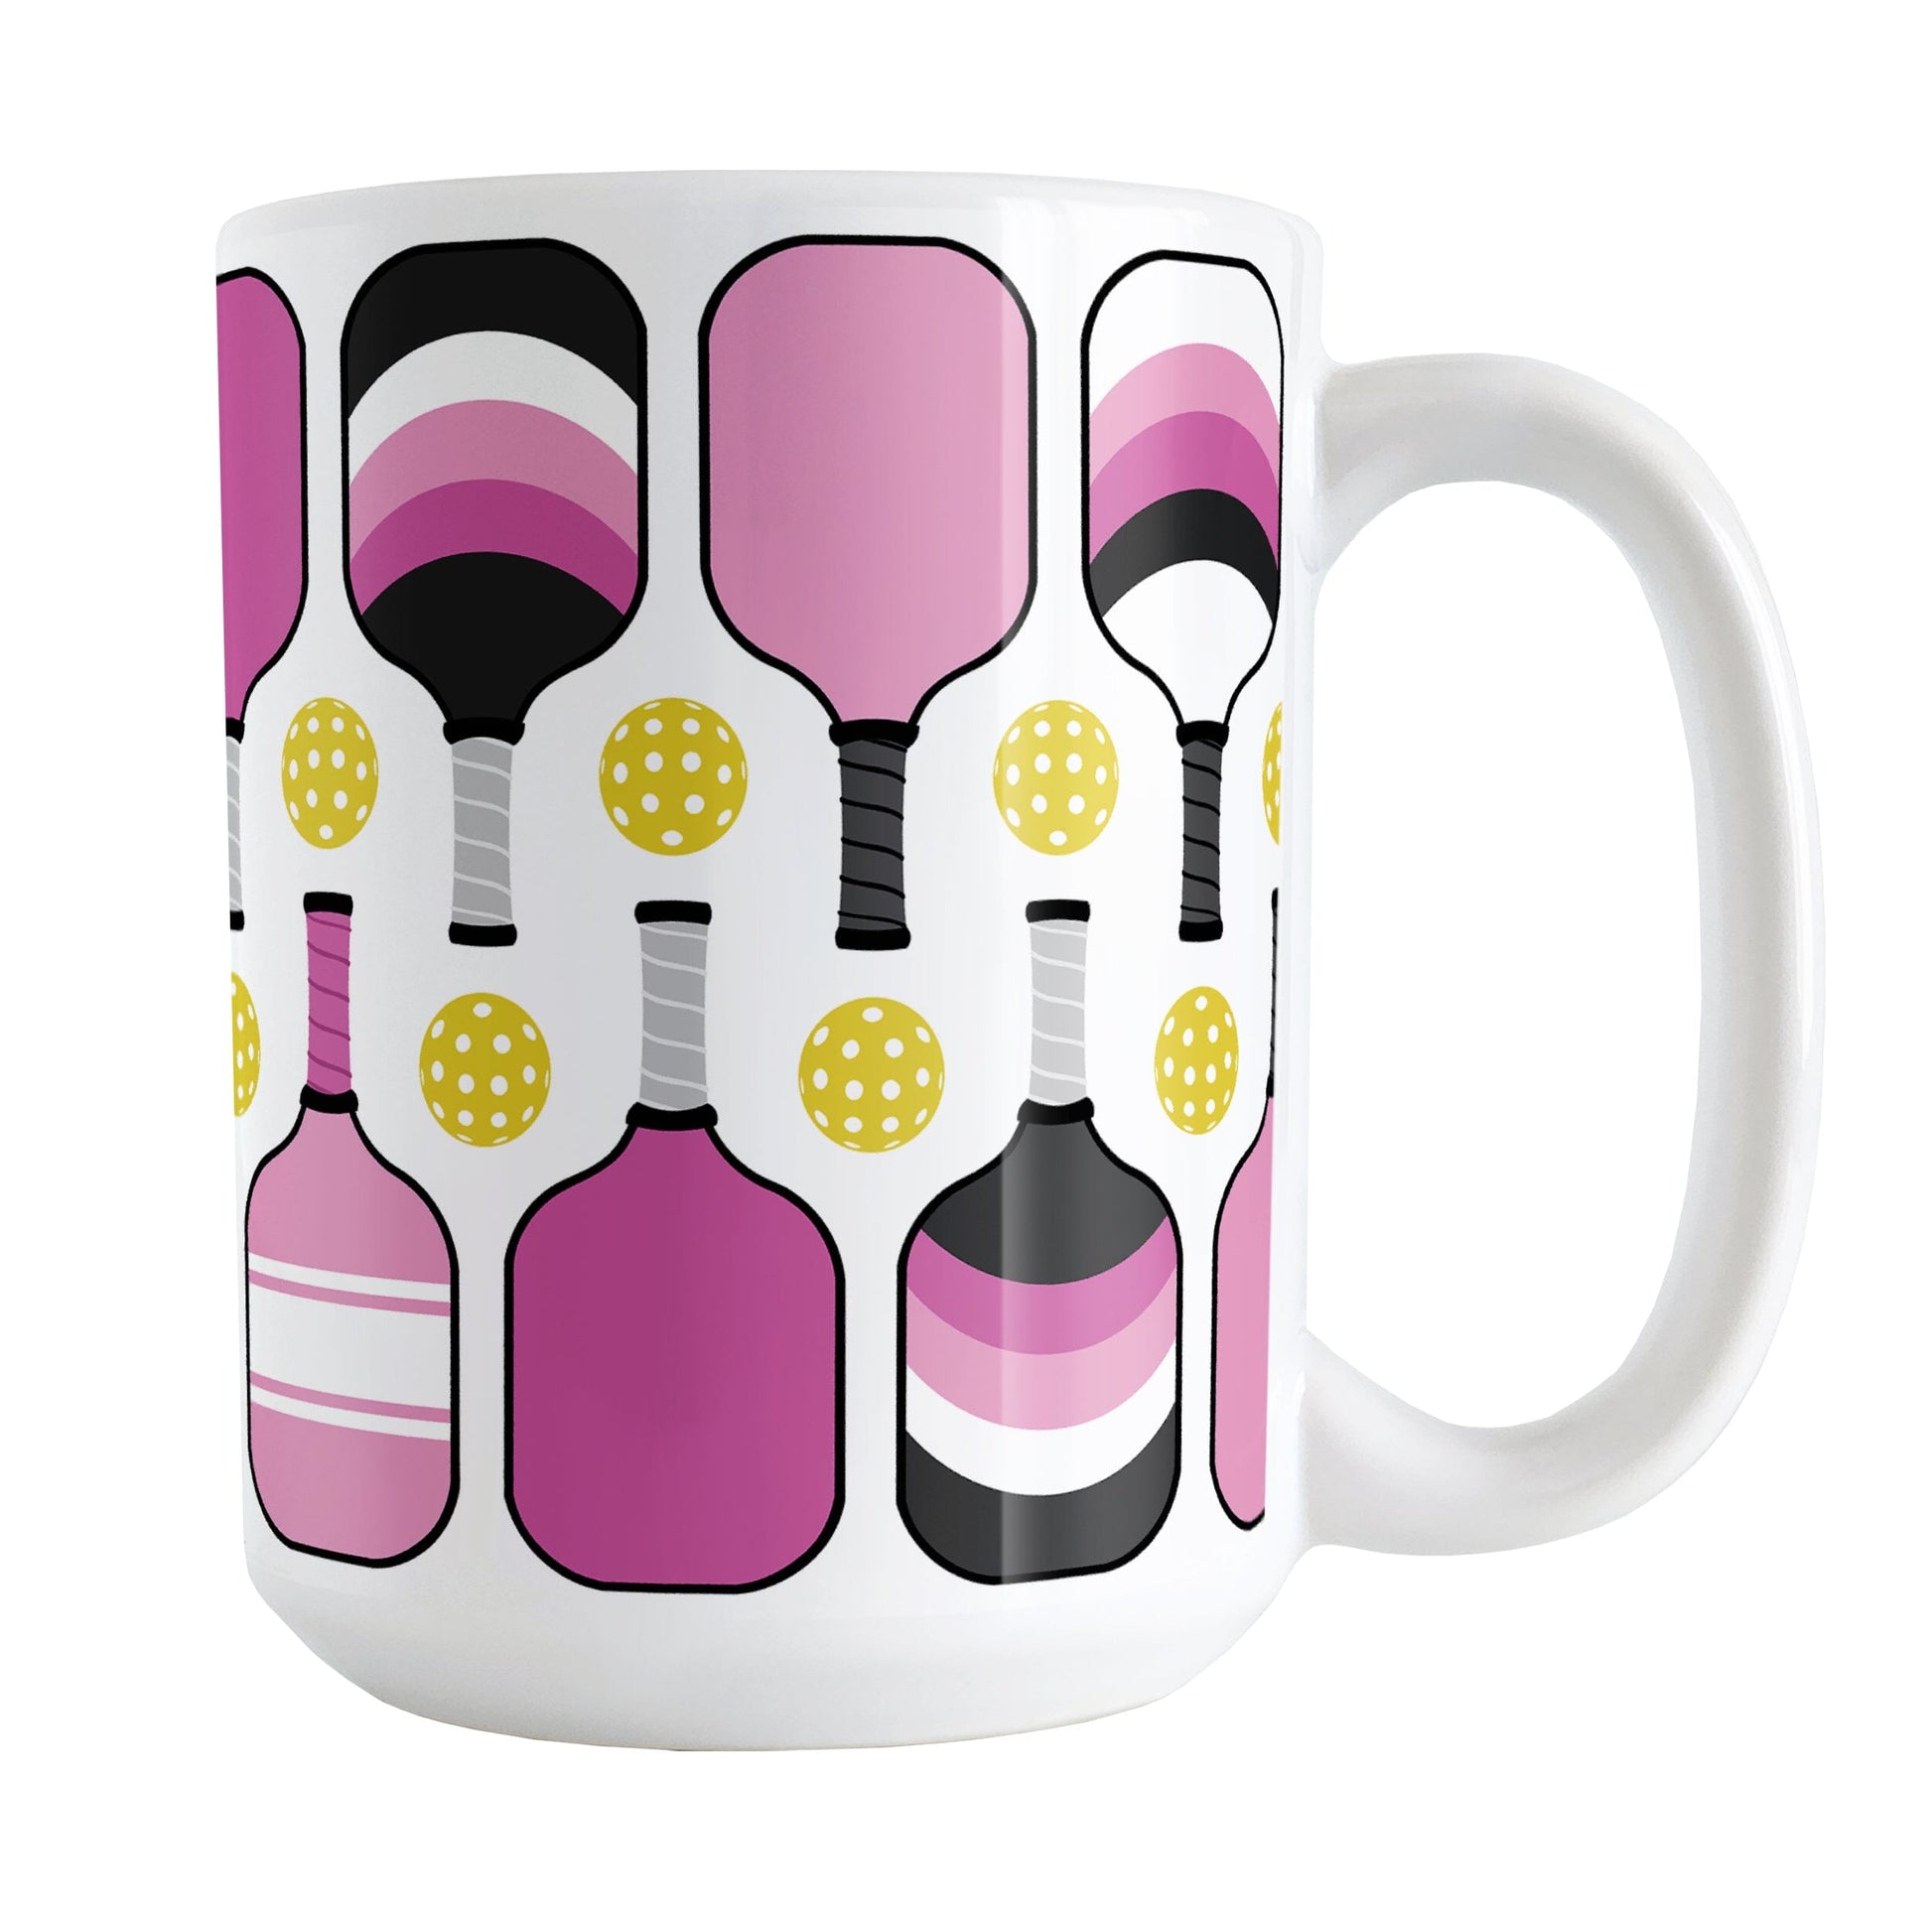 Pink Pickleball Mug (15oz) at Amy's Coffee Mugs. A ceramic coffee mug designed with modern pink pickleball paddles and yellow balls in a pattern that wraps around the mug up to the handle.